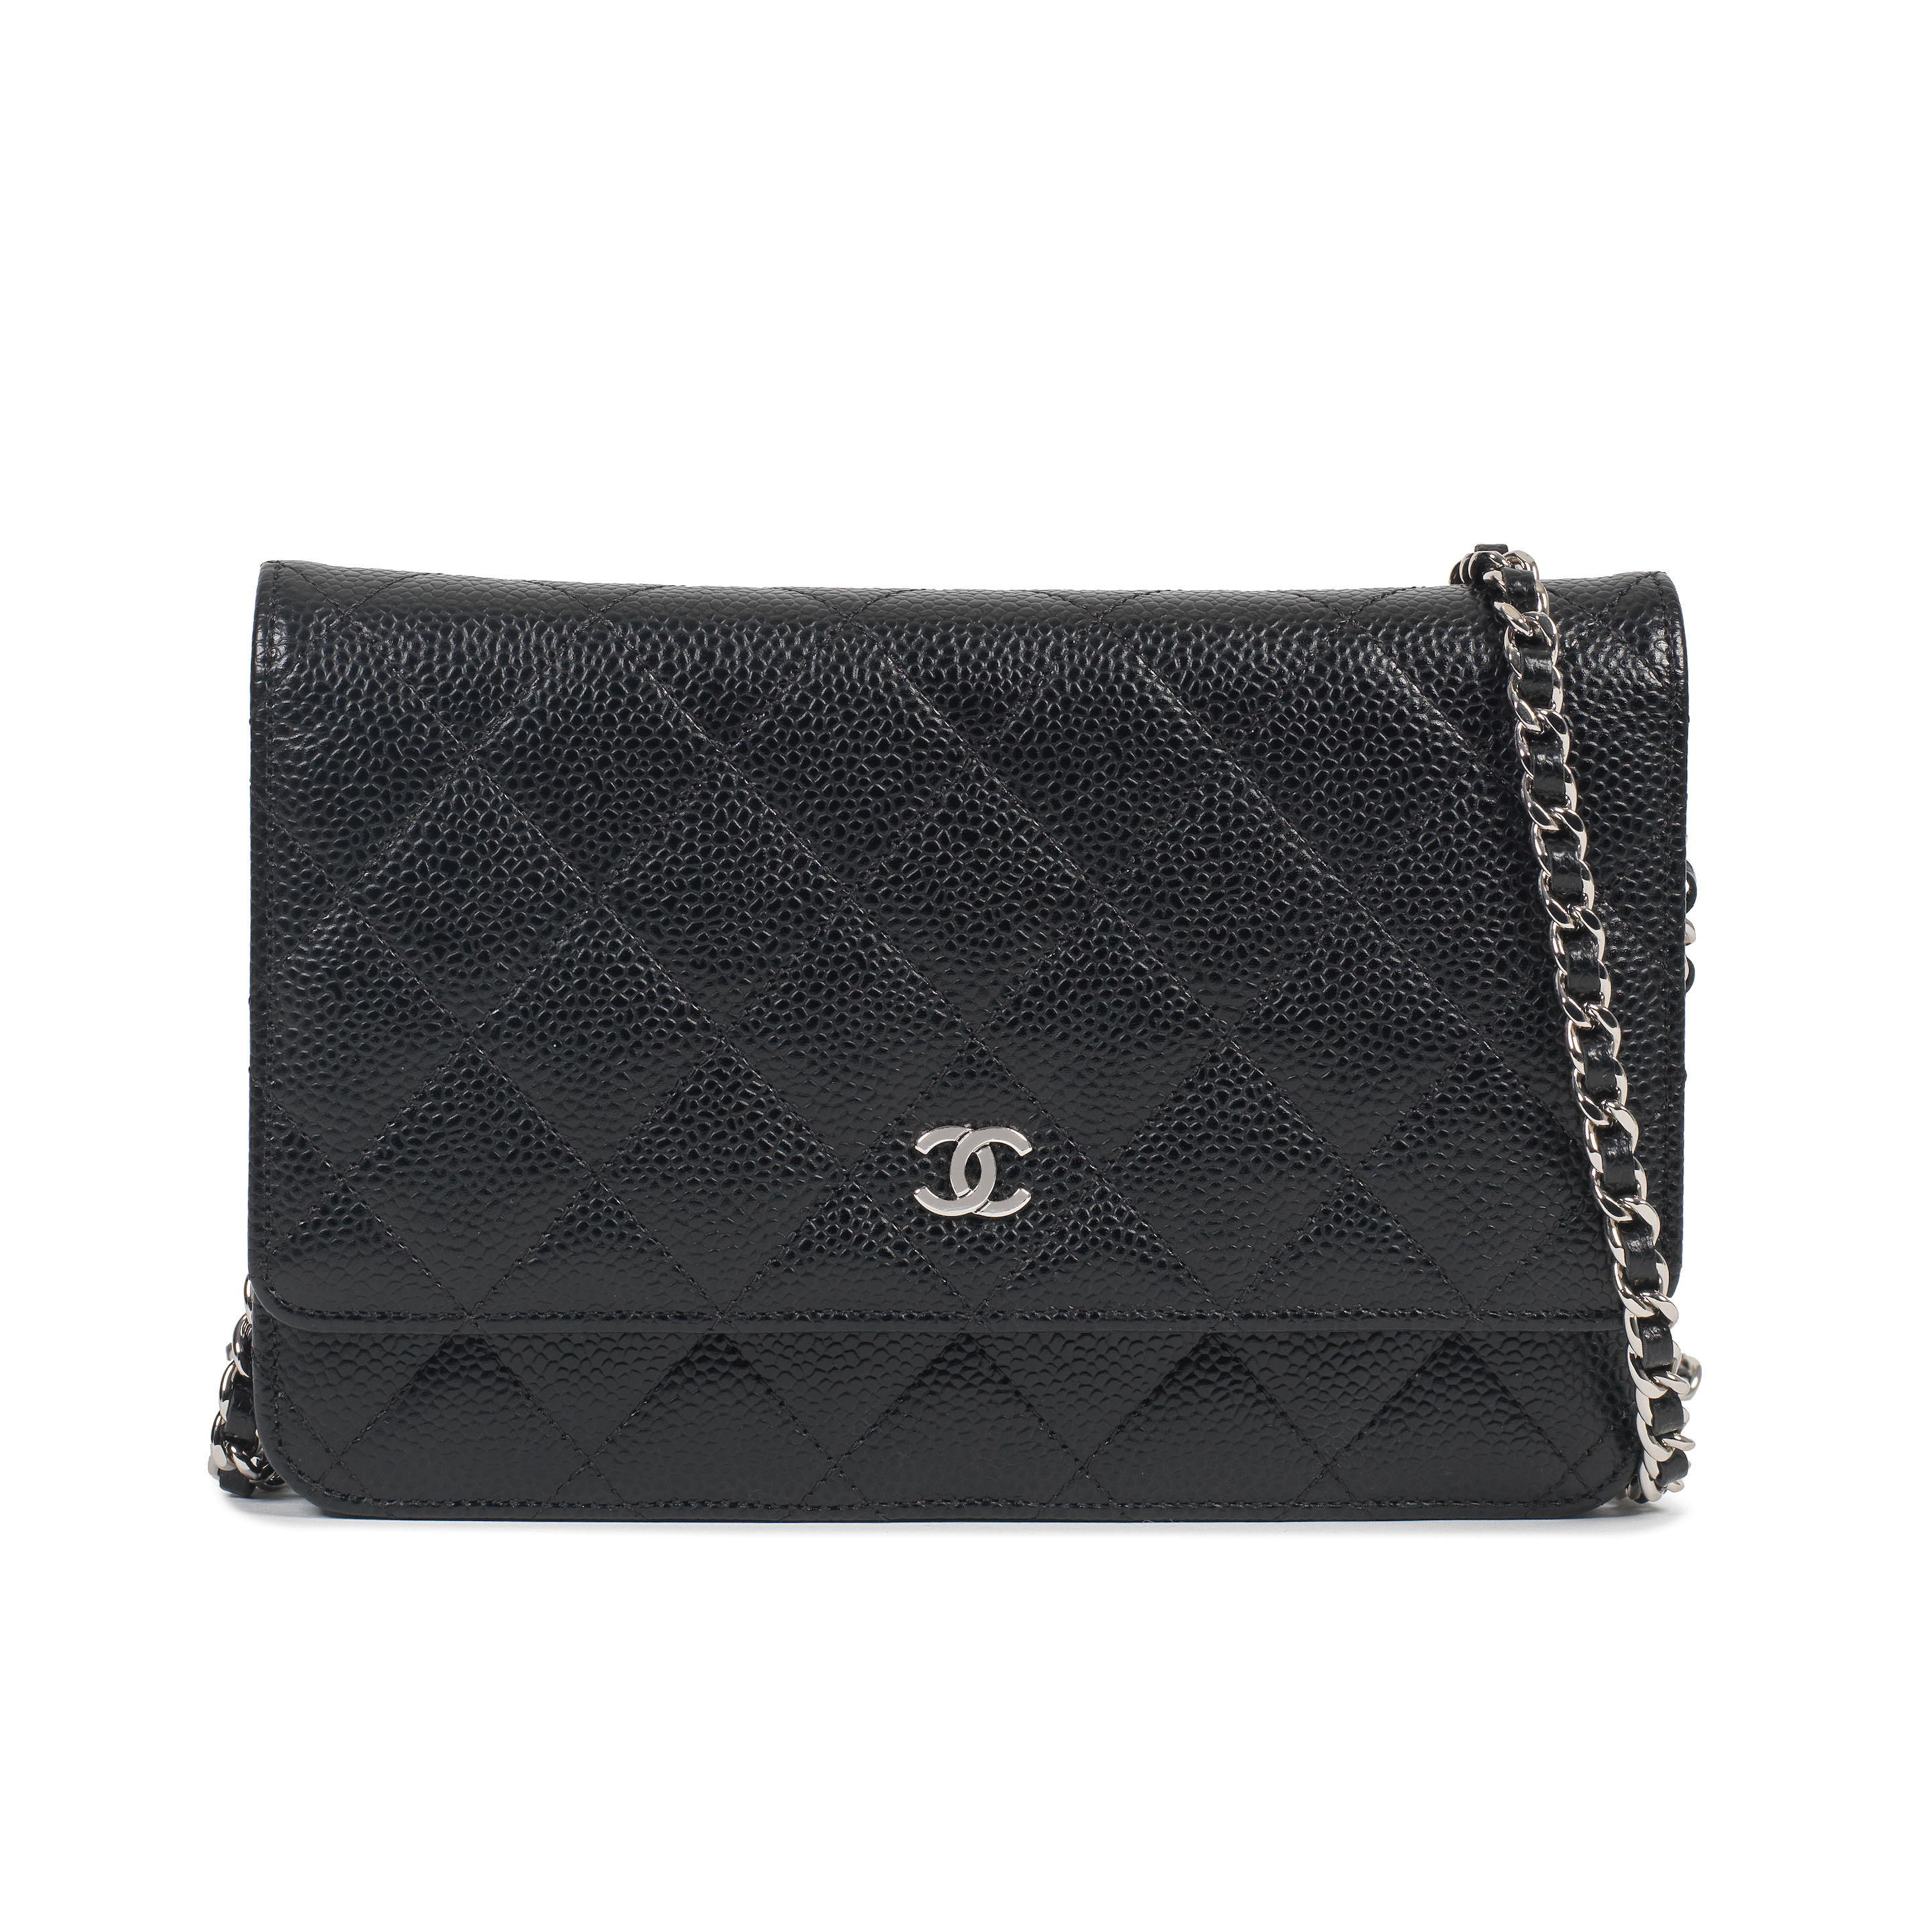 CHANEL Caviar Quilted Wallet on Chain WOC Pink | FASHIONPHILE